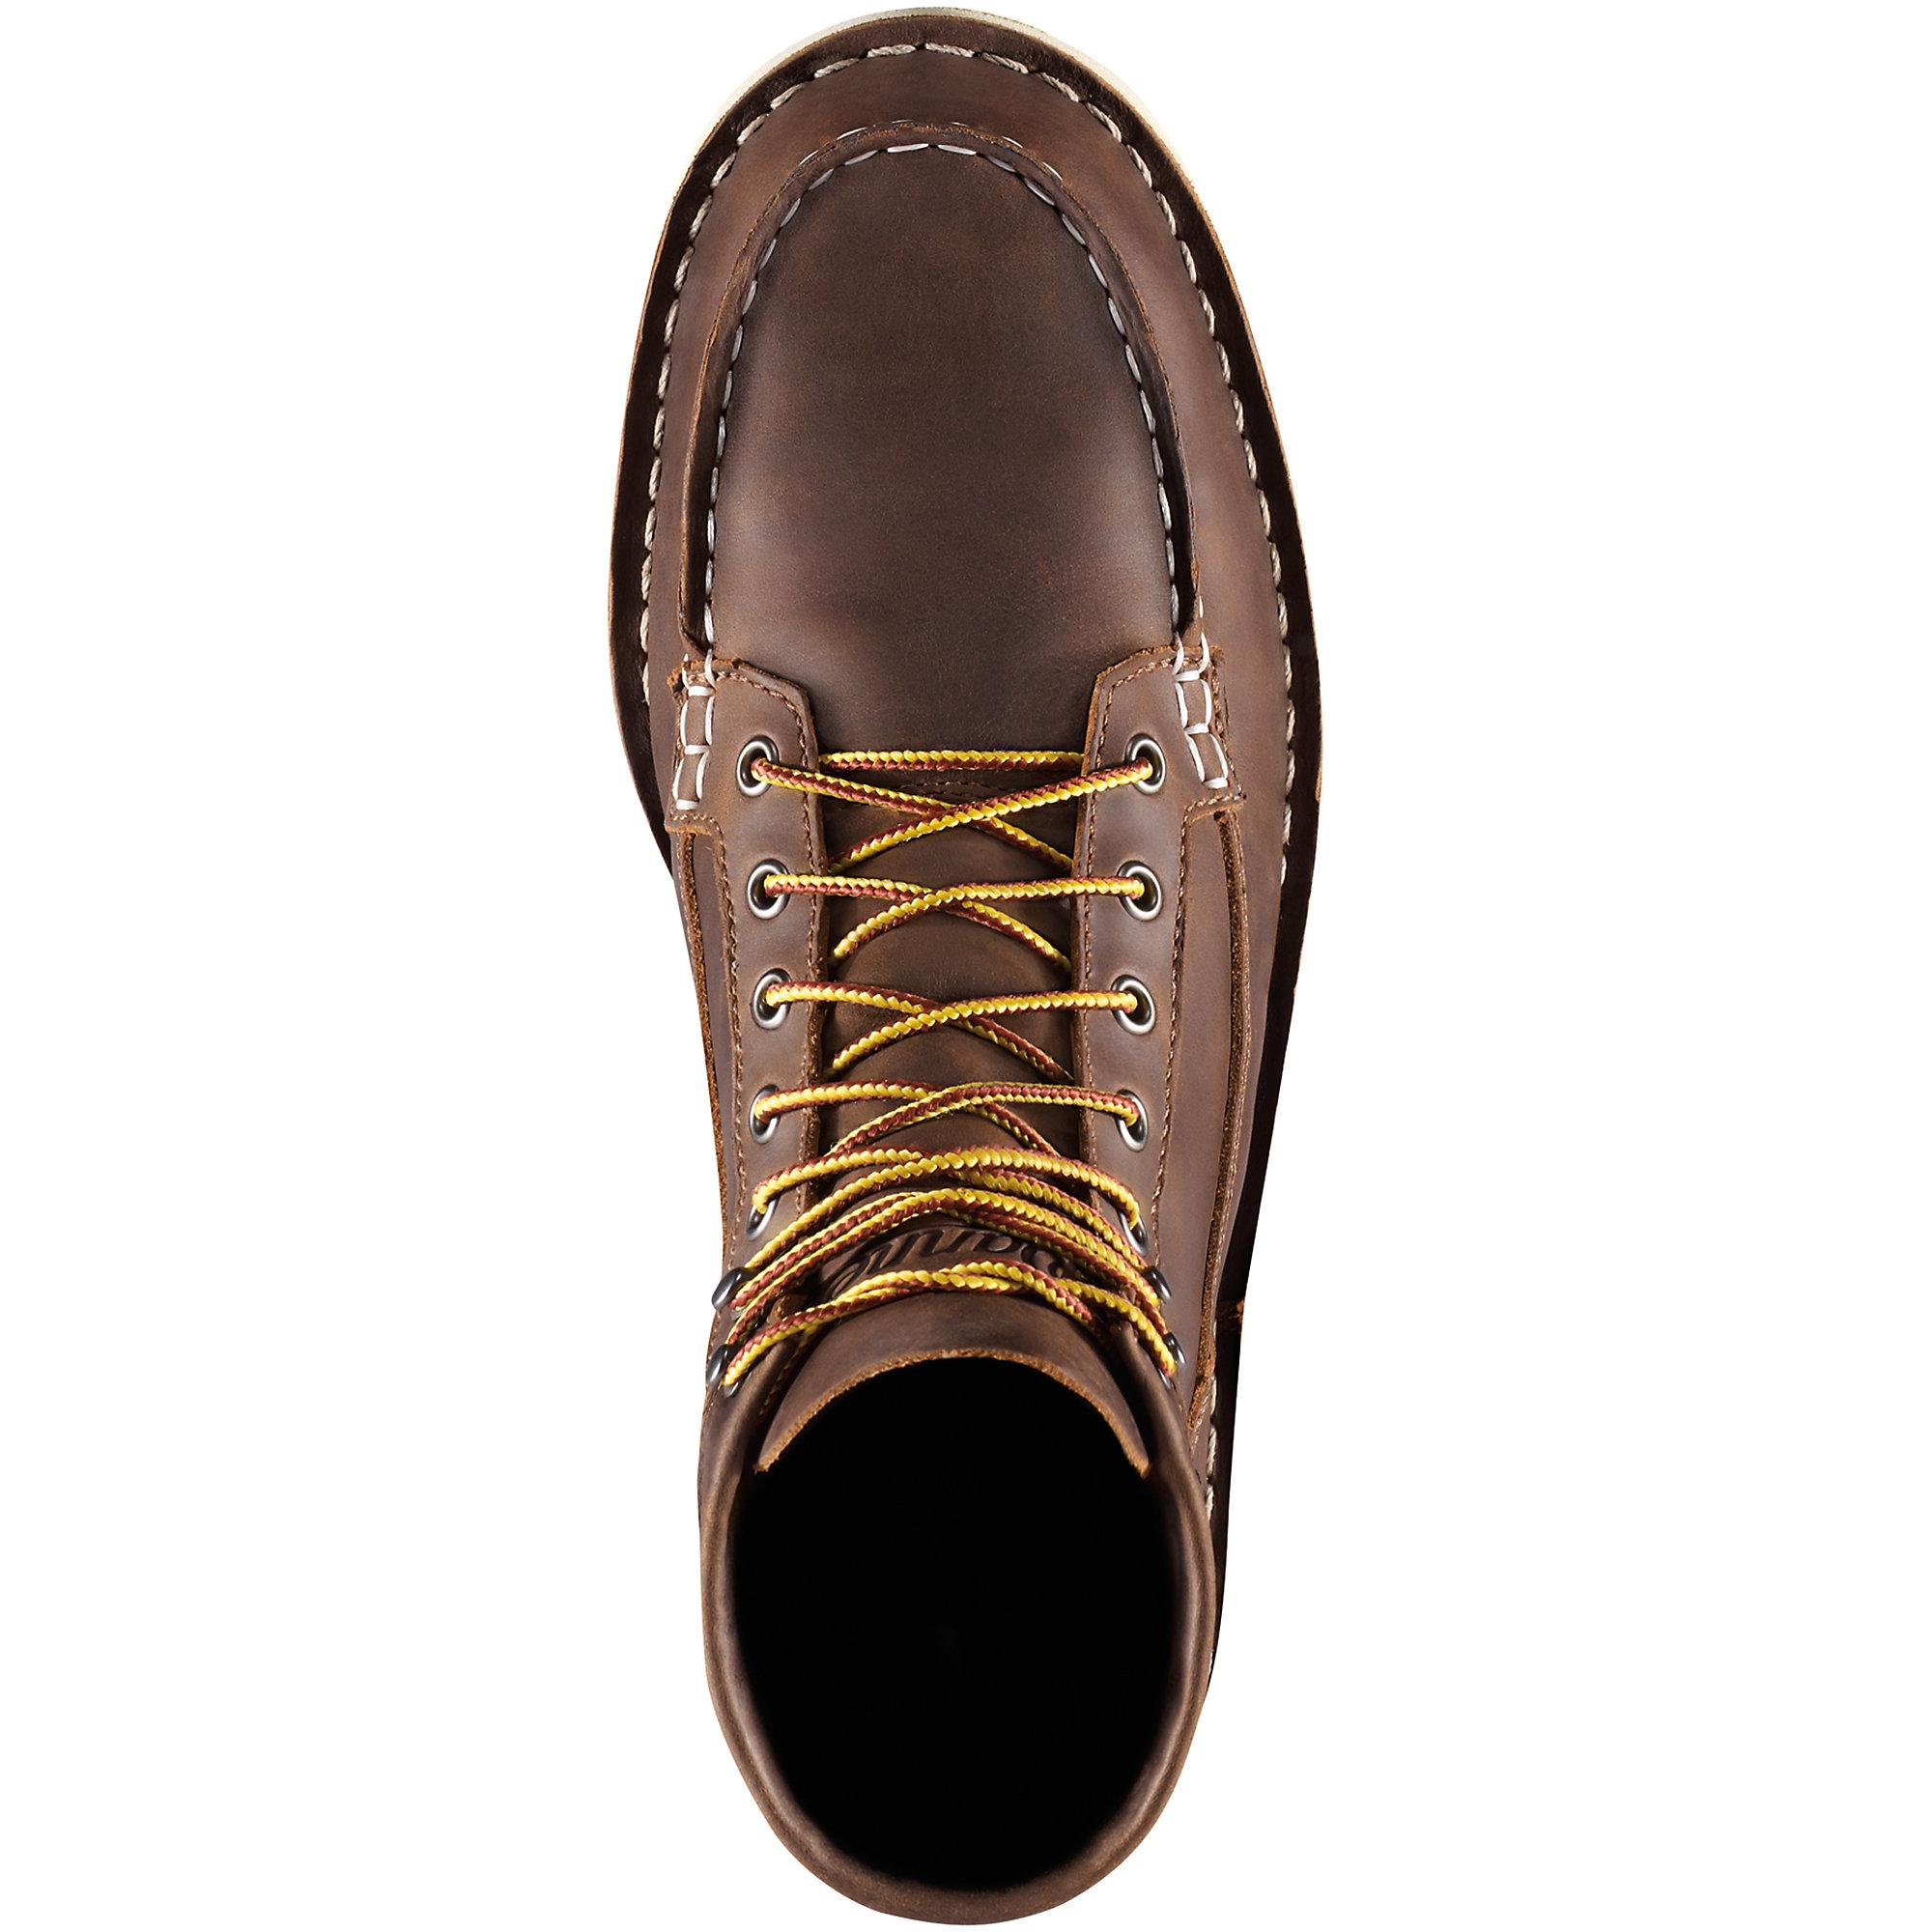 Danner Leather Men's Bull Run Moc Toe 6-inch Work Boots in Brown for ...